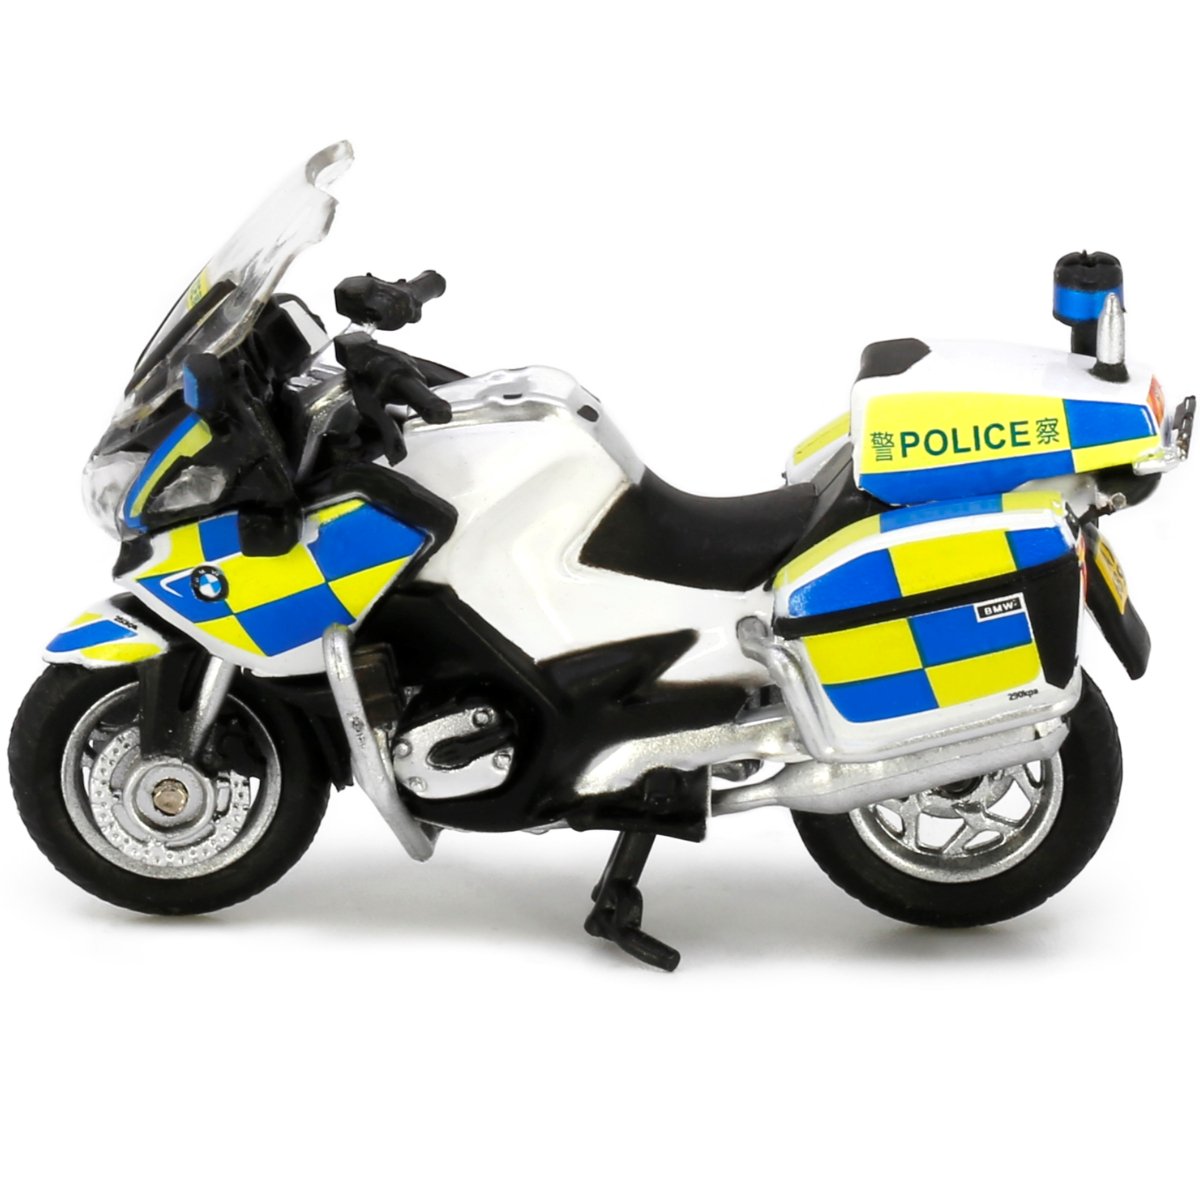 Tiny Models BMW R900RT-P Police Motorcycle (1:43 Scale) - Phillips Hobbies